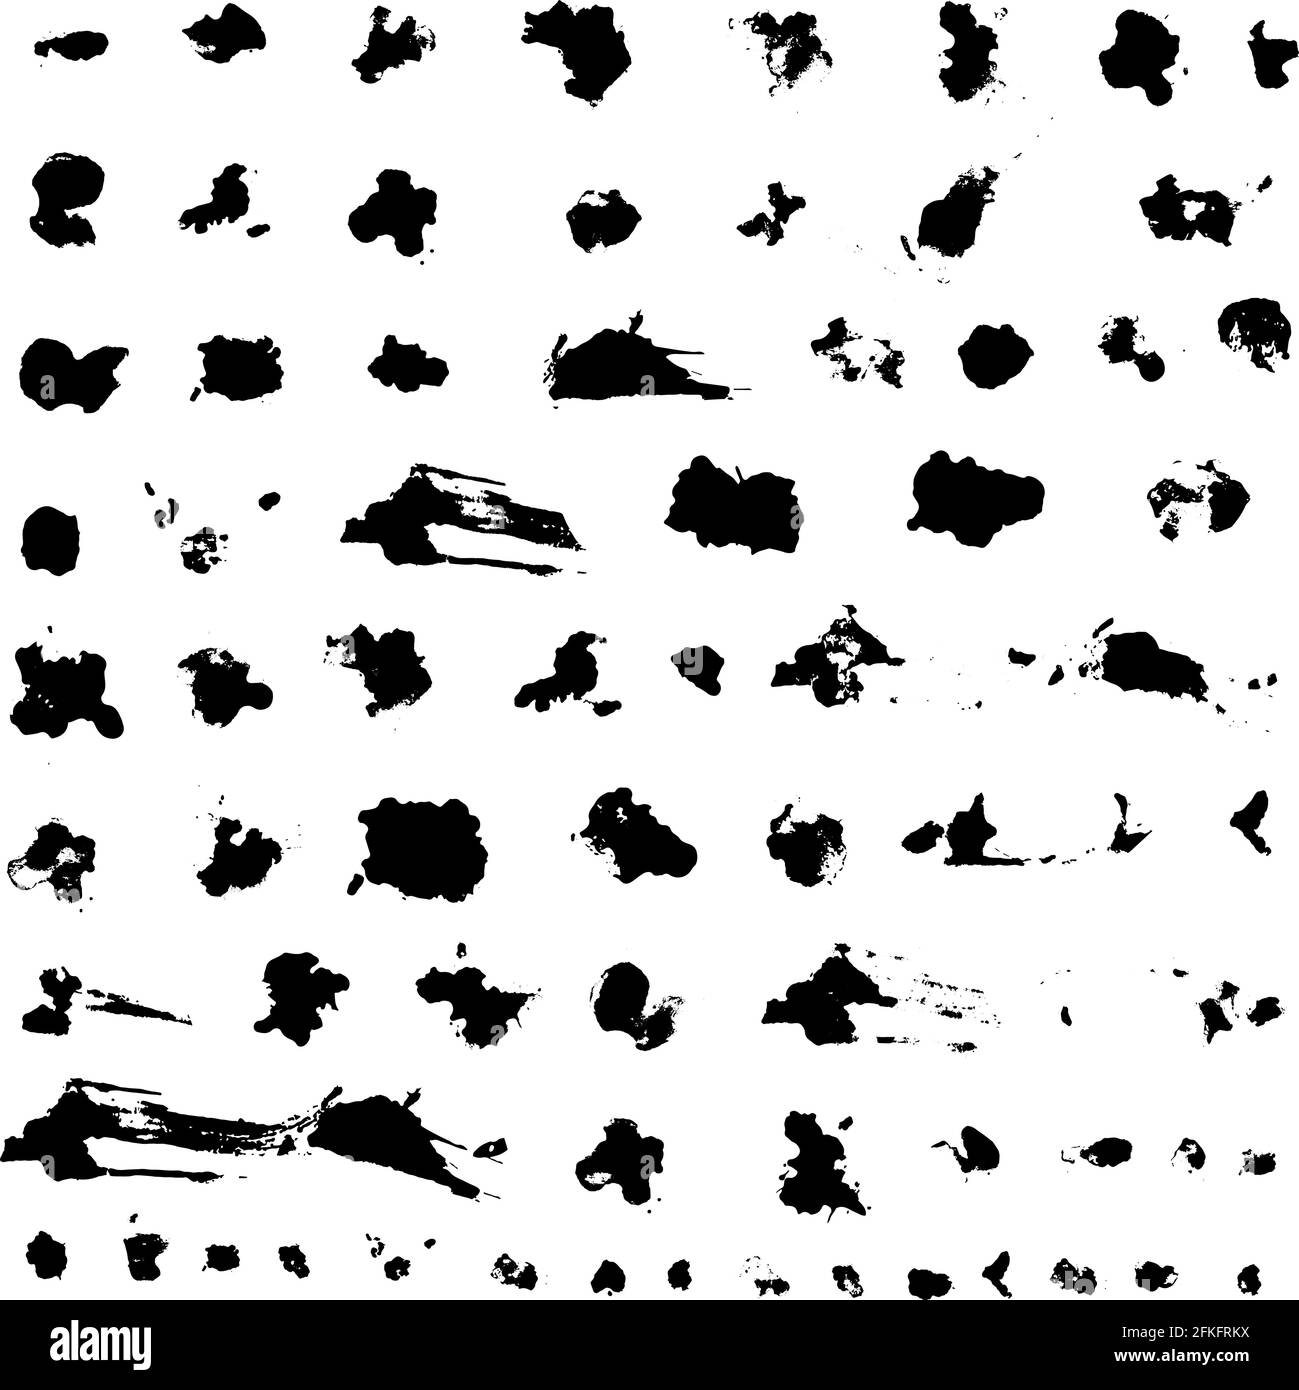 Set of 70 paint stains. High quality black ink splatters isolated on white. Grunge artistic elements of design. Collection of spray liquid and drops. Stock Vector